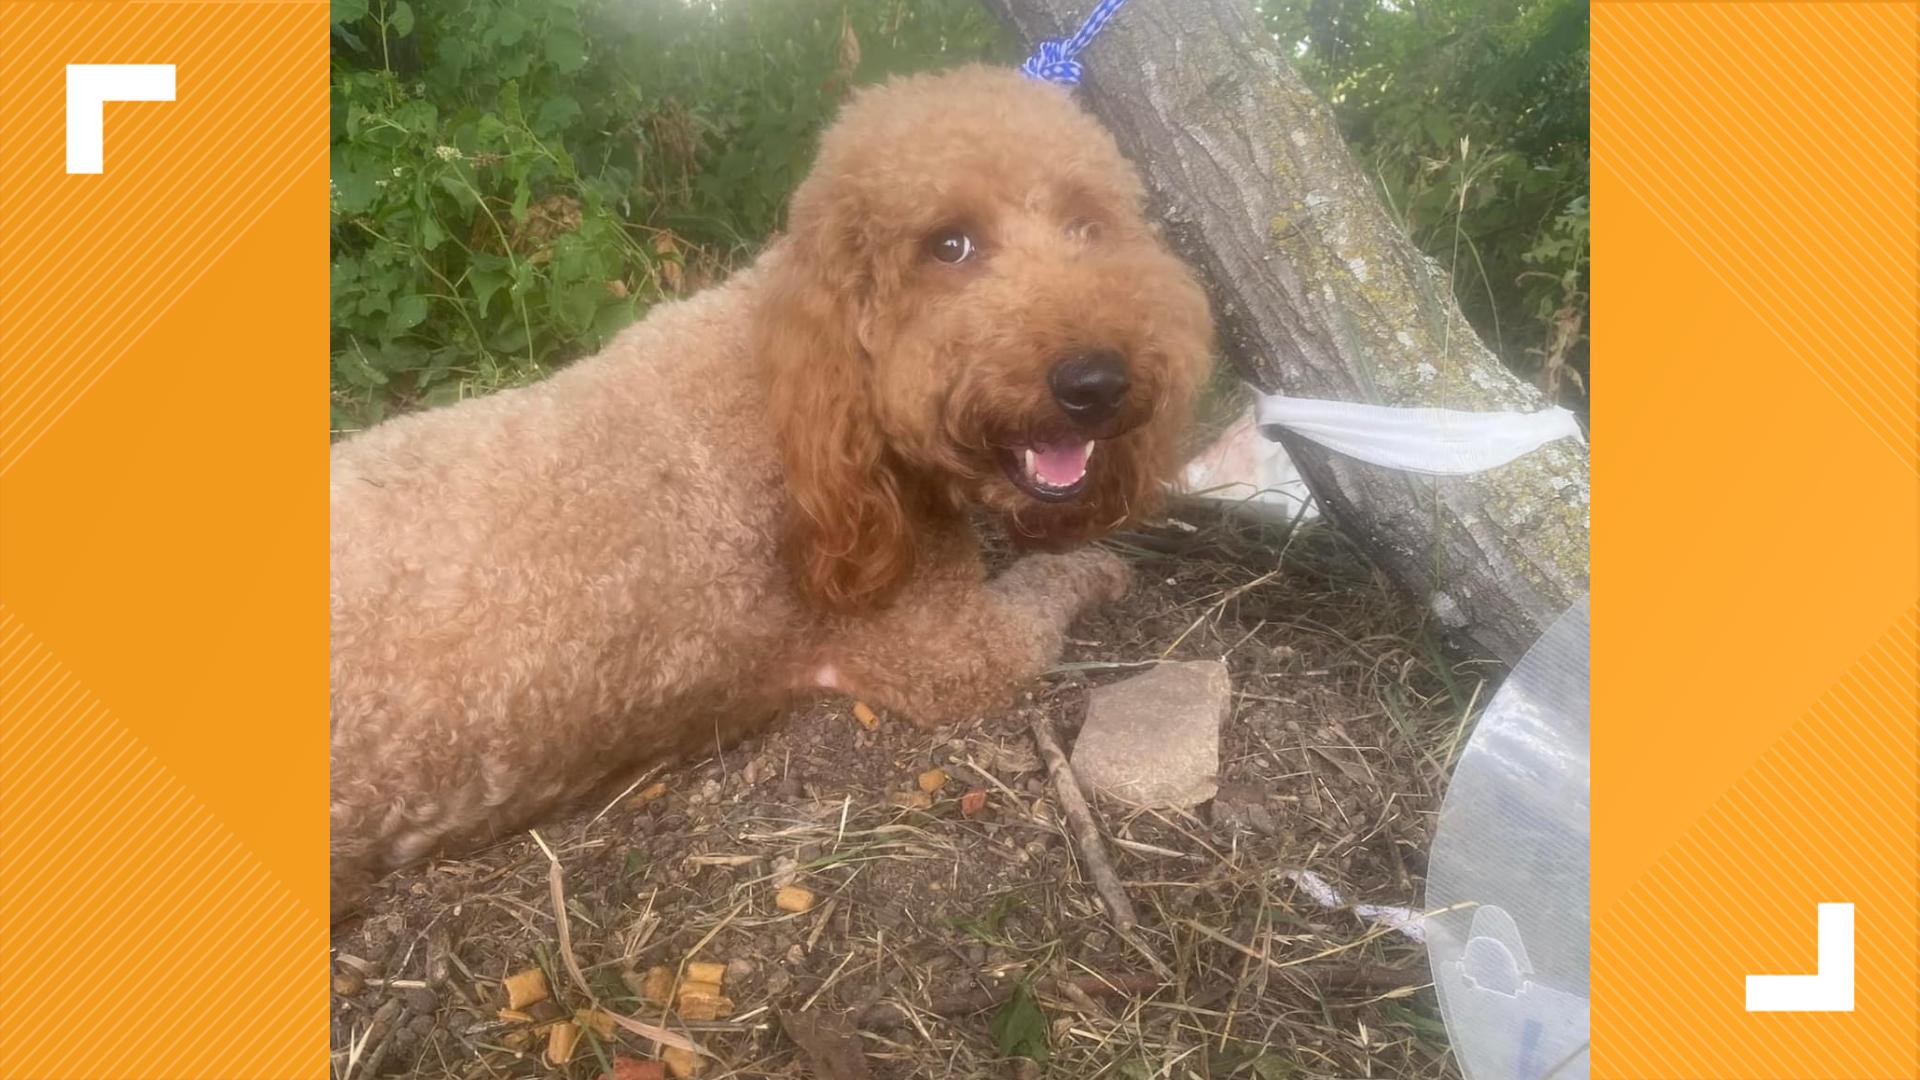 A 3-year-old Labradoodle is recovering from surgery after someone tied the dog to a tree and abandoned him. KVUE spoke with Austin Pets Alive! about his condition.